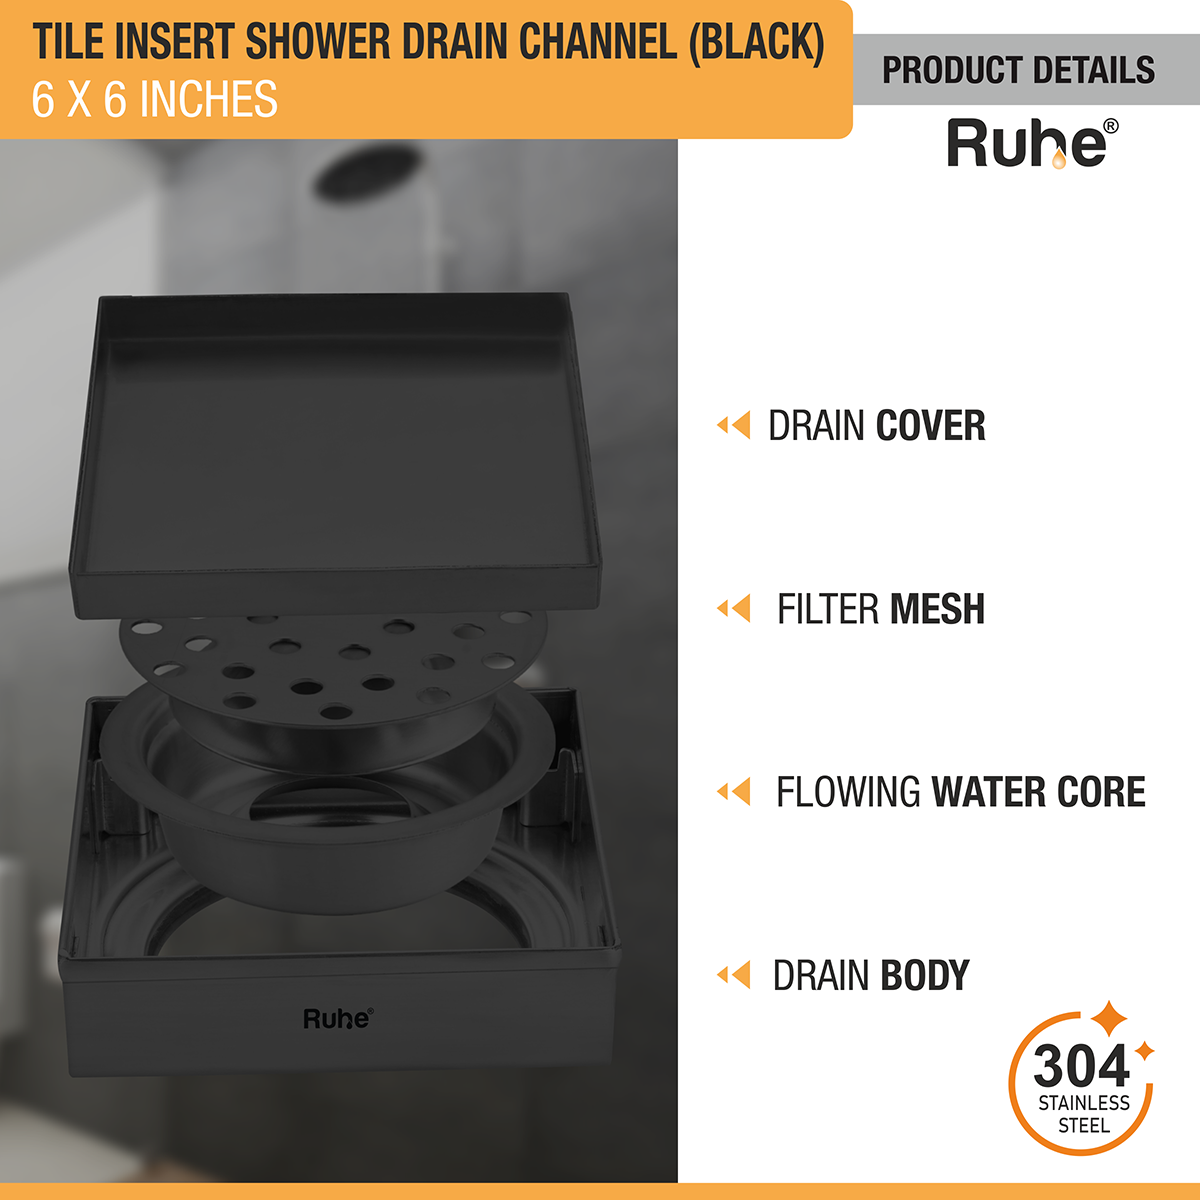 Tile Insert Shower Drain Channel (6 x 6 Inches) Black PVD Coated with drain cover, filter mesh, flowing water core, drain body